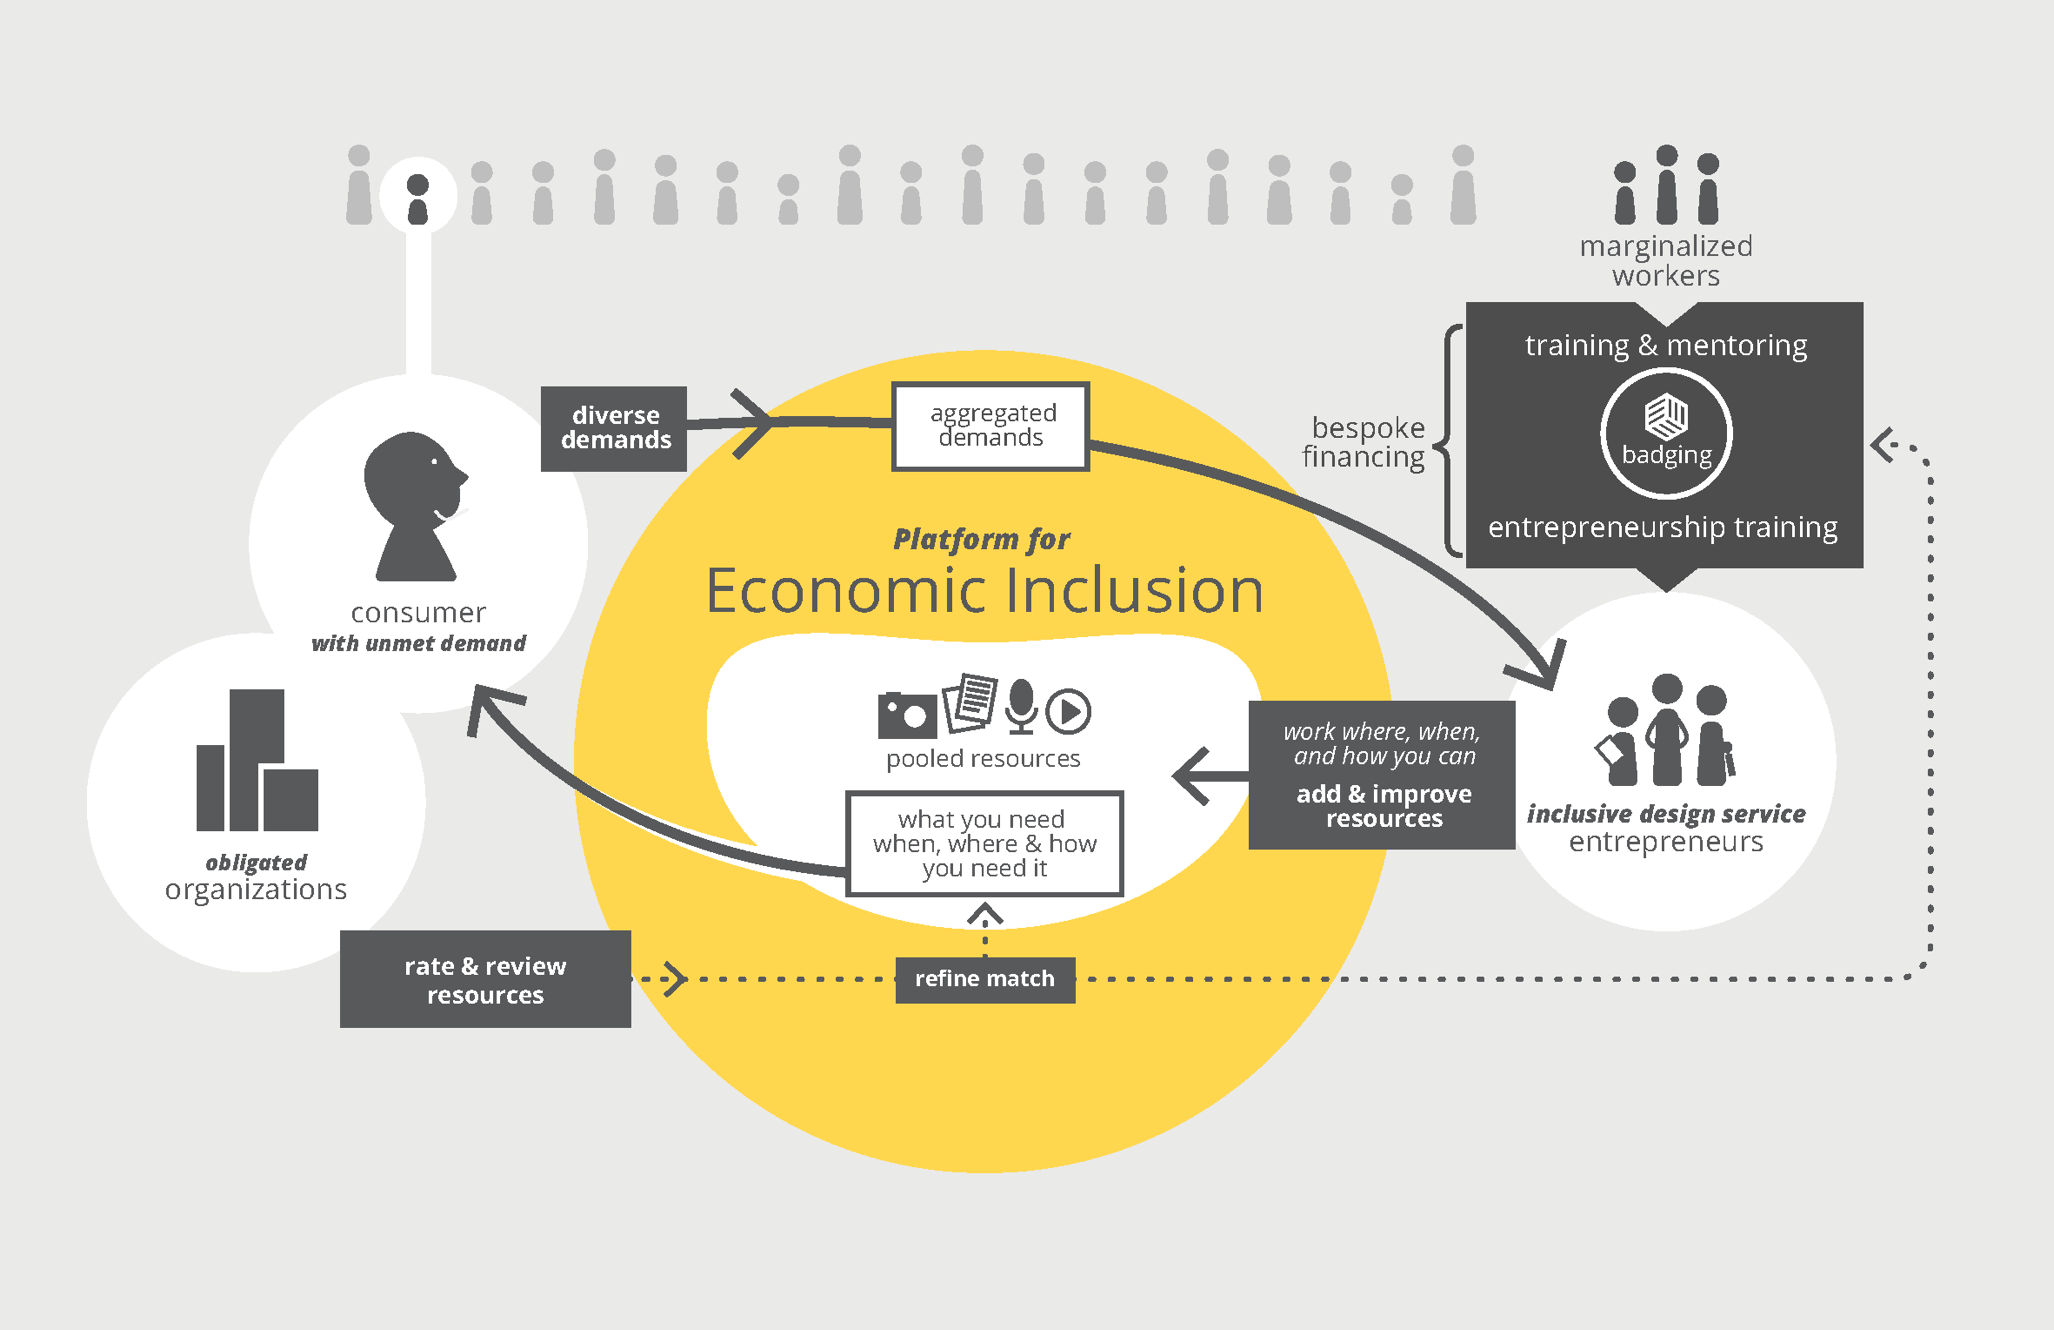 Diagram showing the elements that make up the Platform for Economic Inclusion